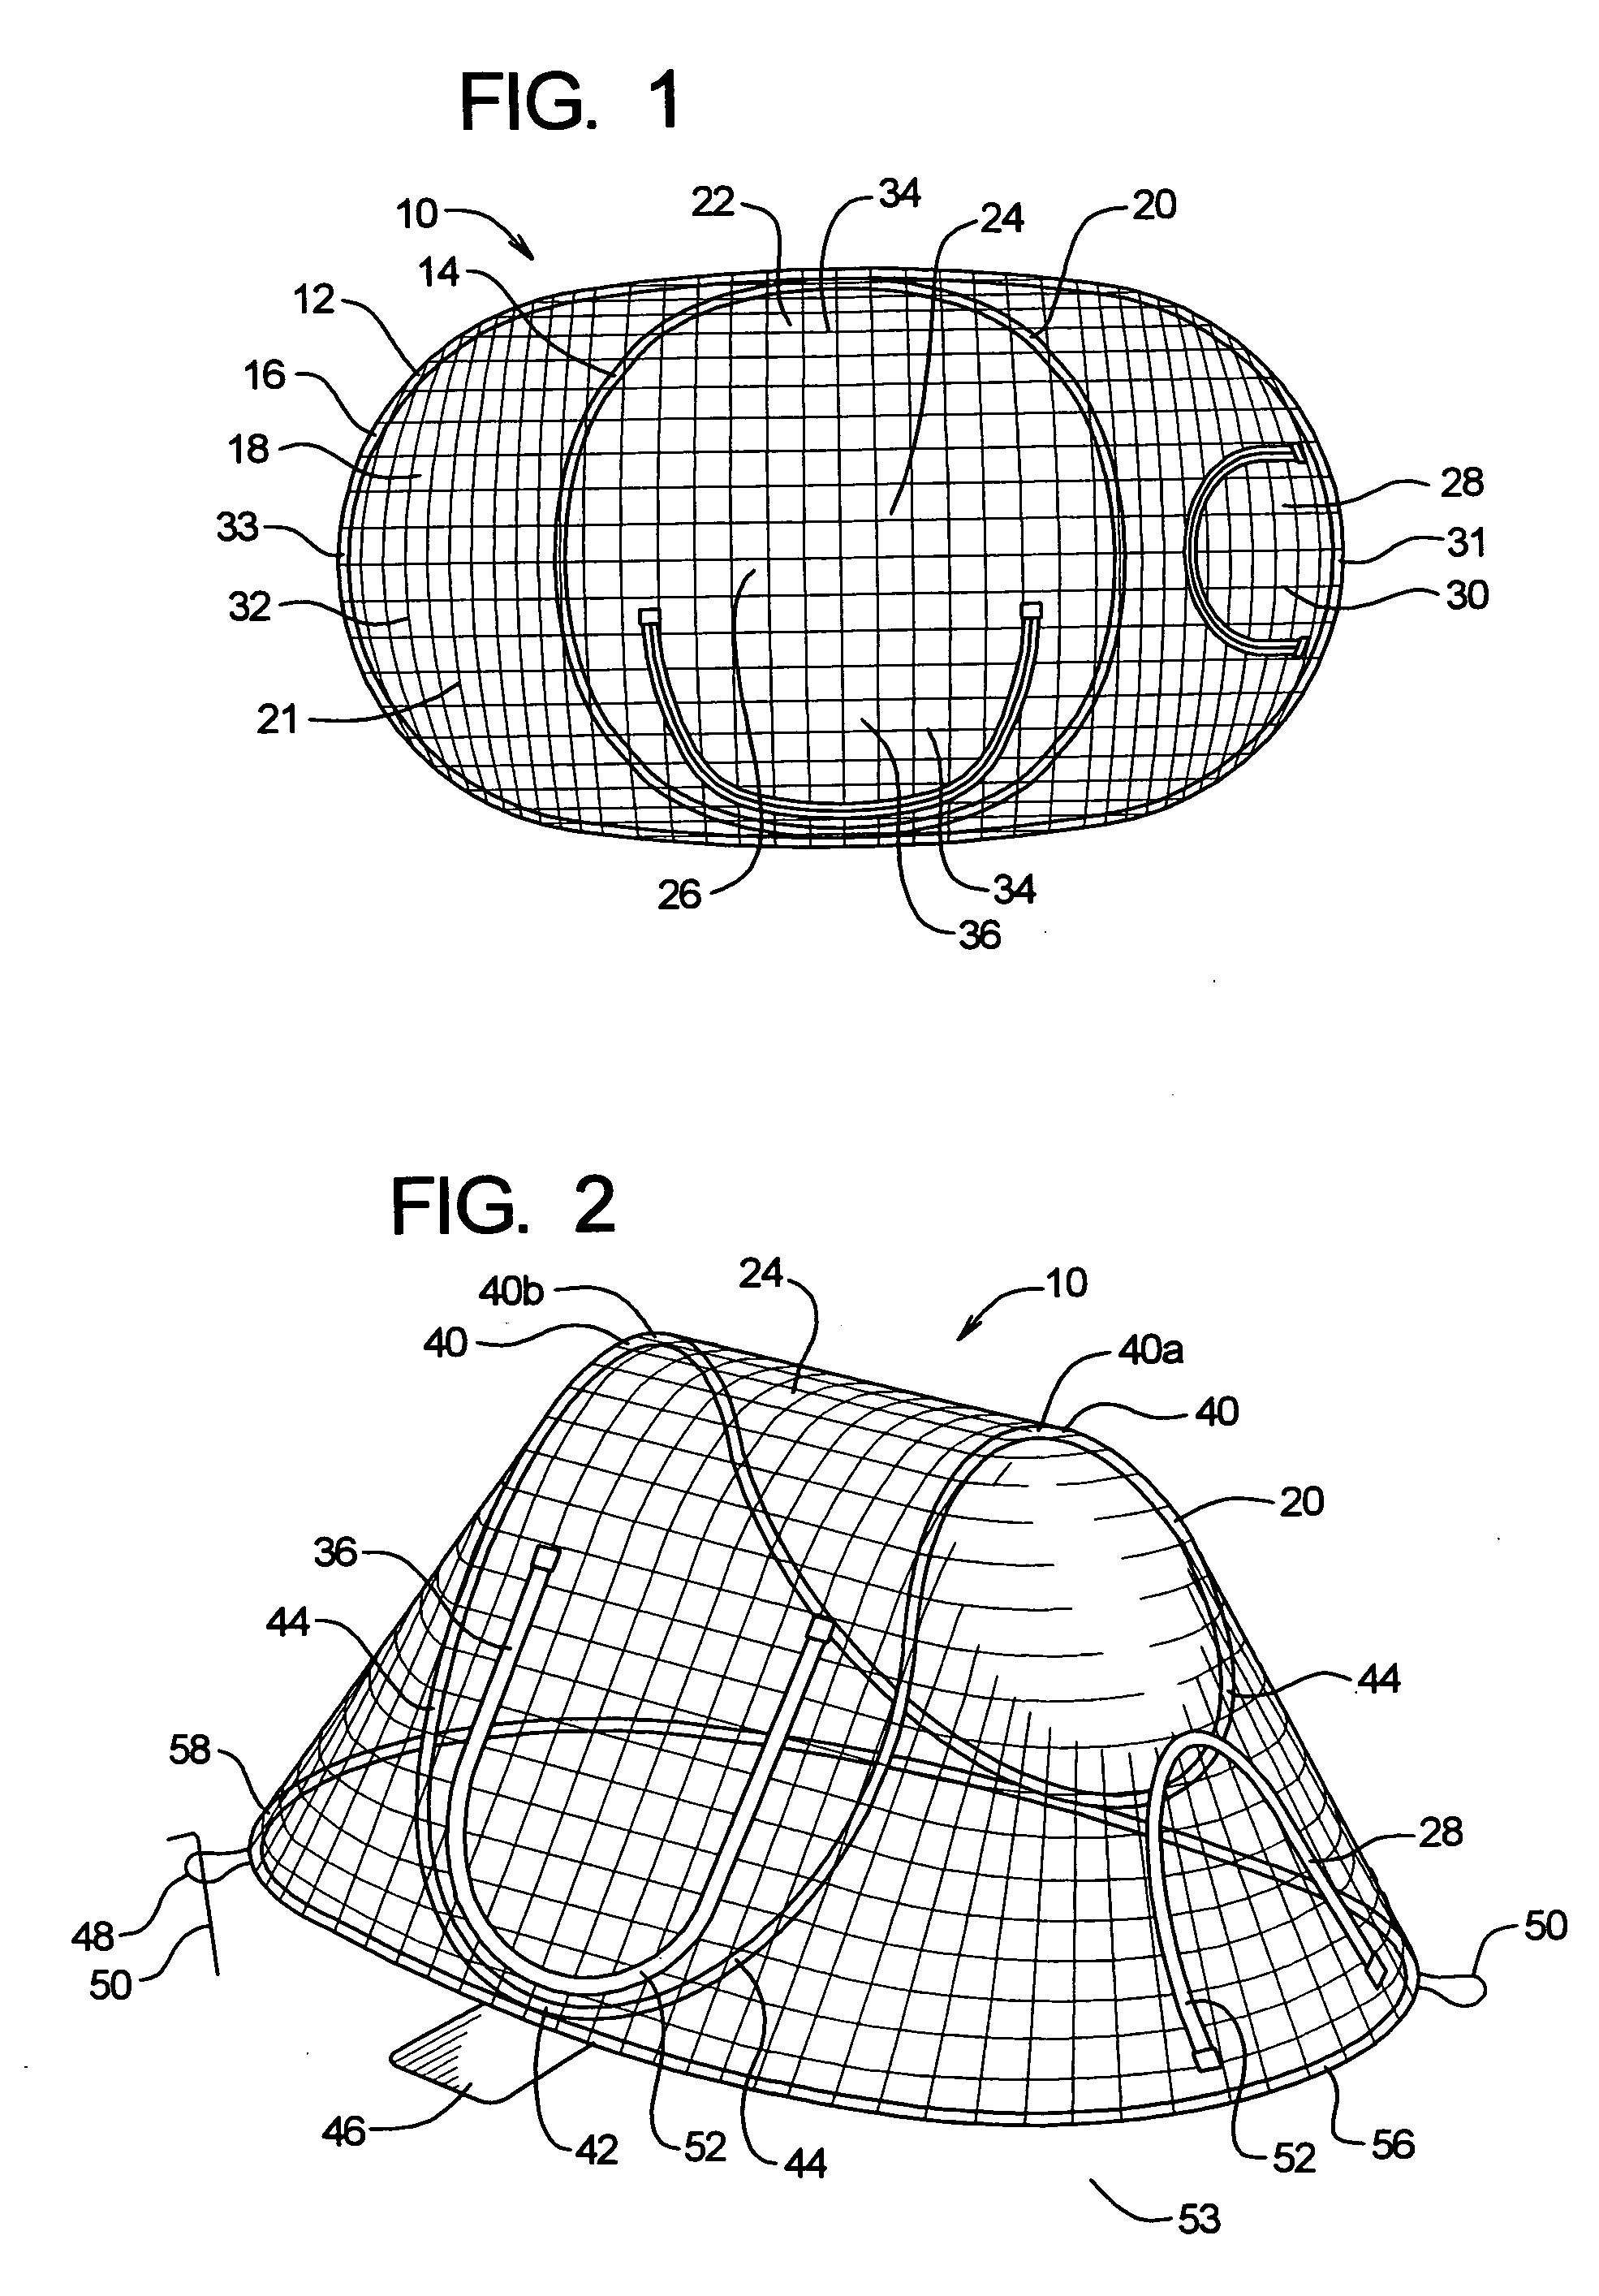 Pet safety enclosure method and apparatus